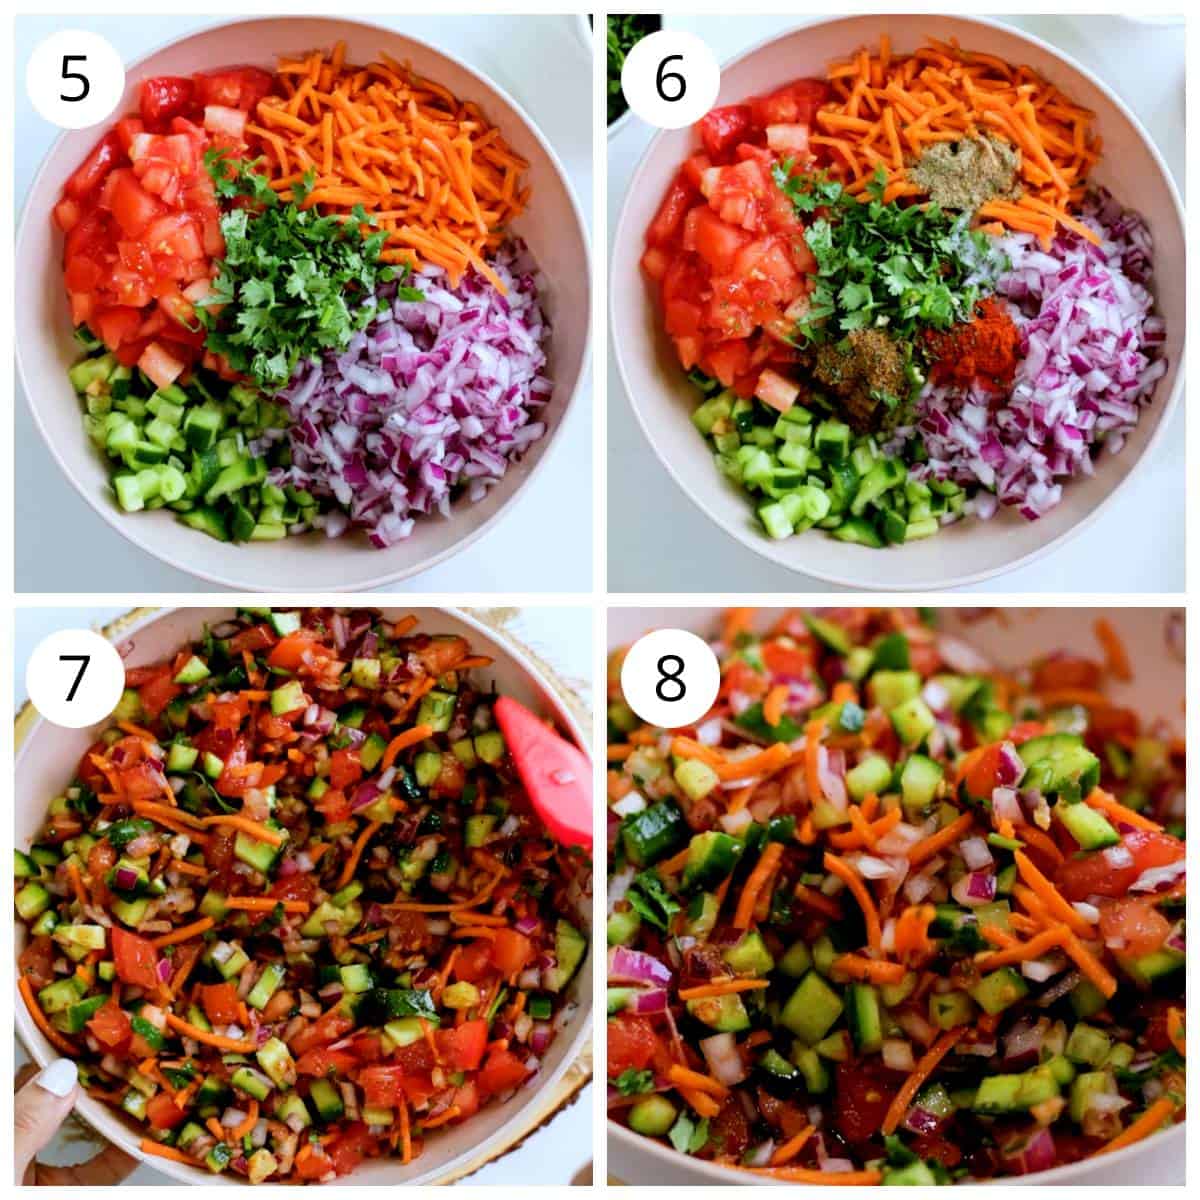 Steps on how to make kachumber salad at home